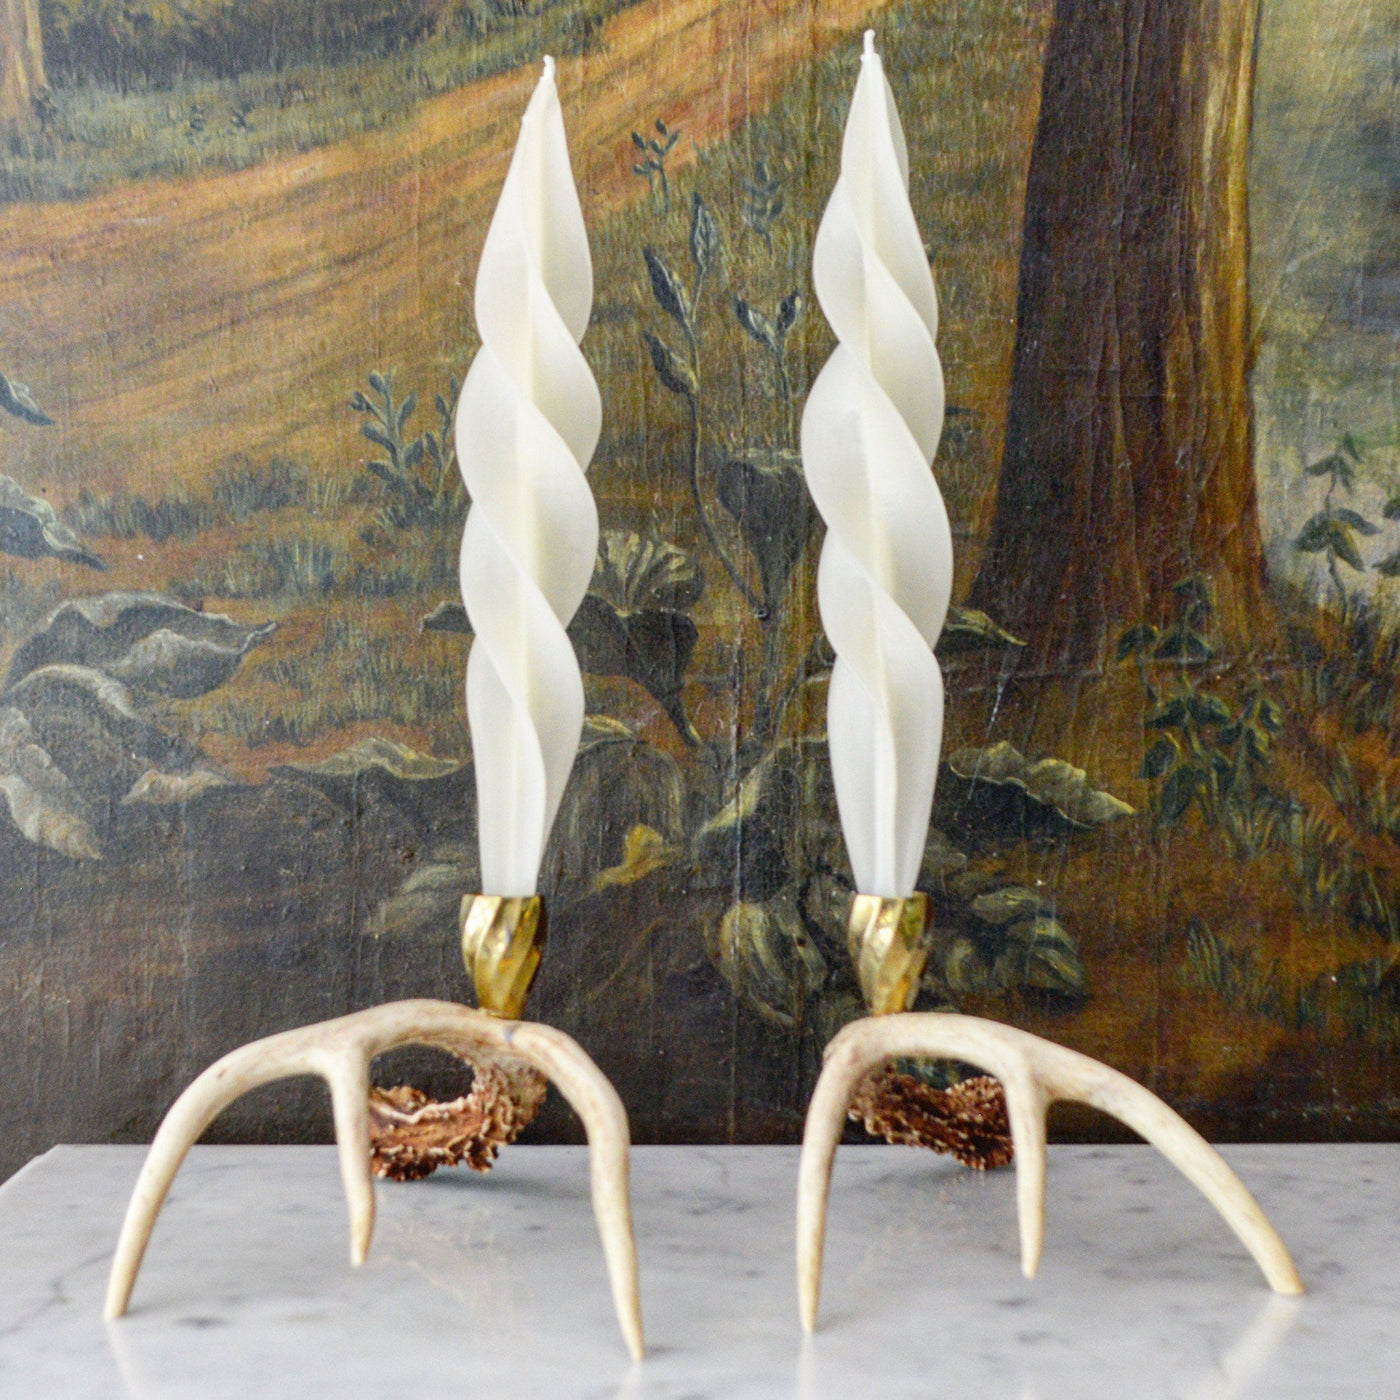 White Feather Candles (2) Chefanie 